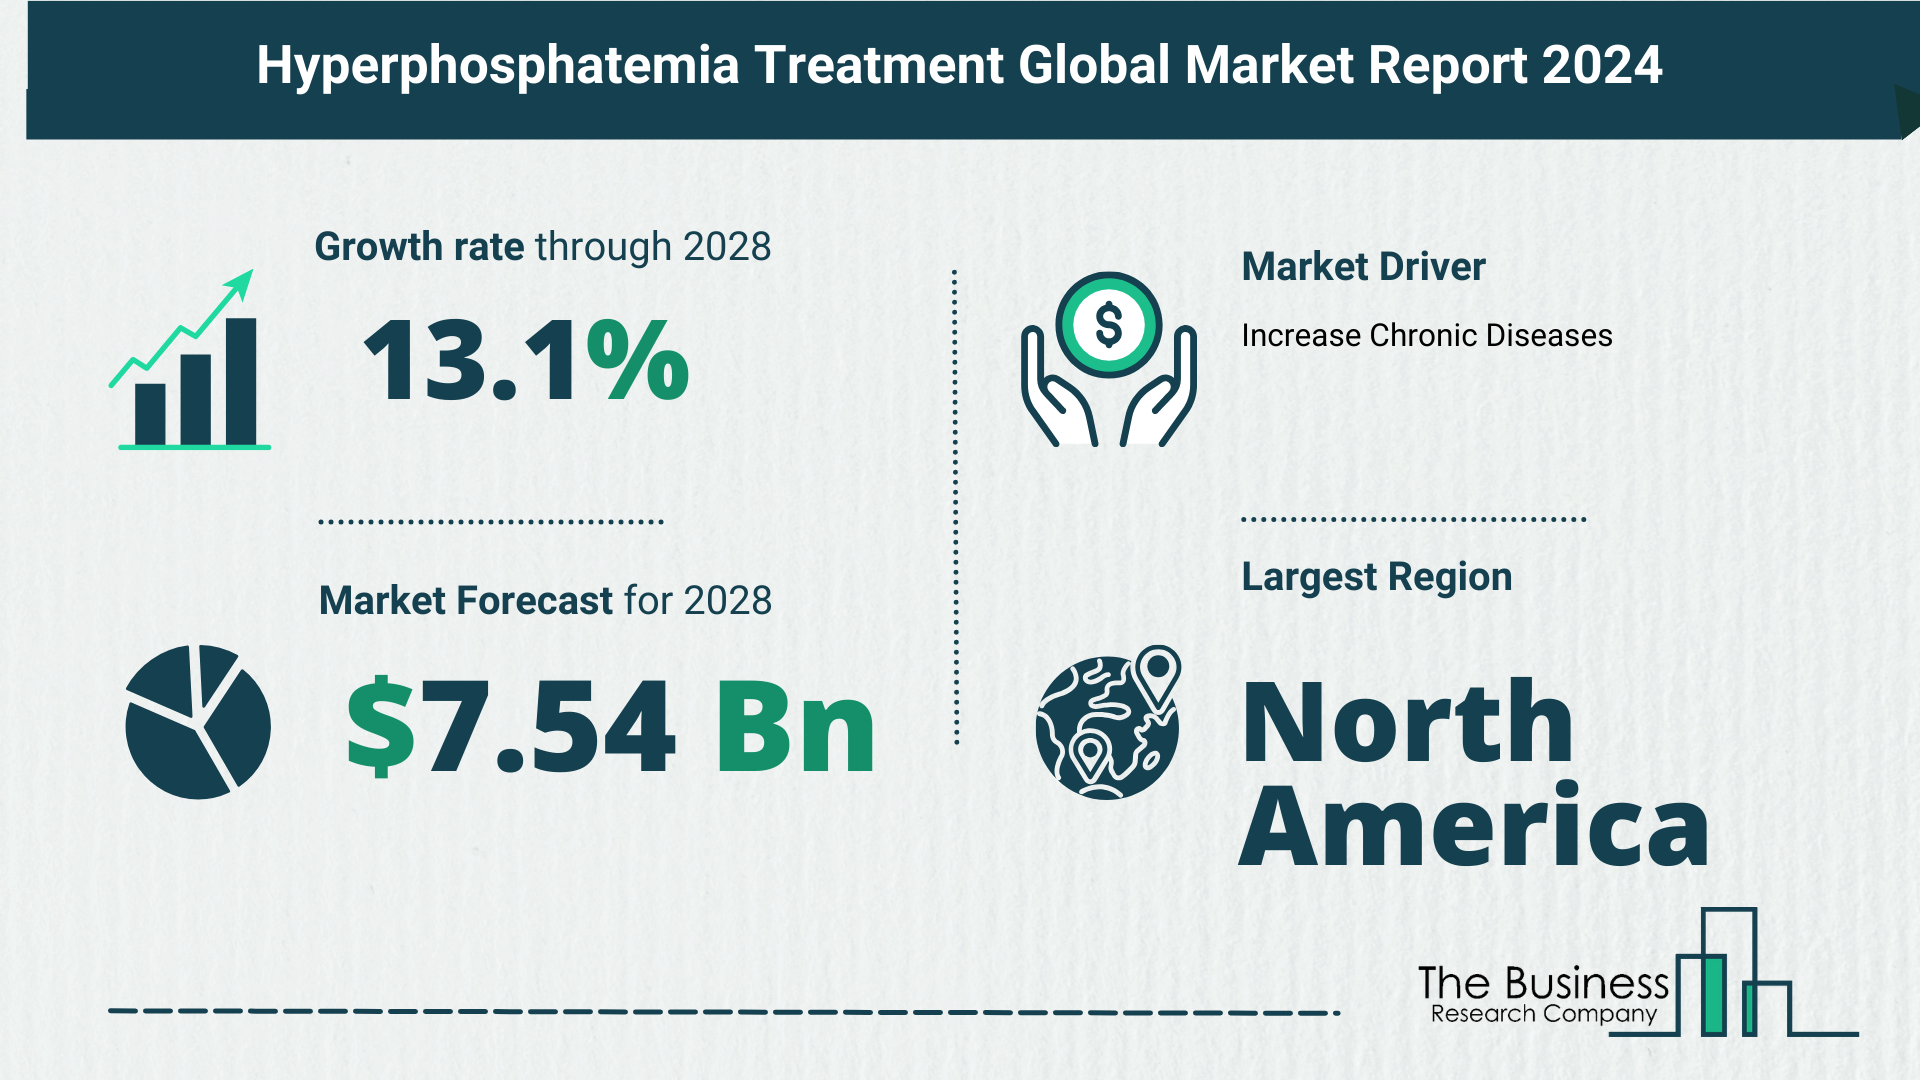 Global Hyperphosphatemia Treatment Market Analysis: Estimated Market Size And Growth Rate